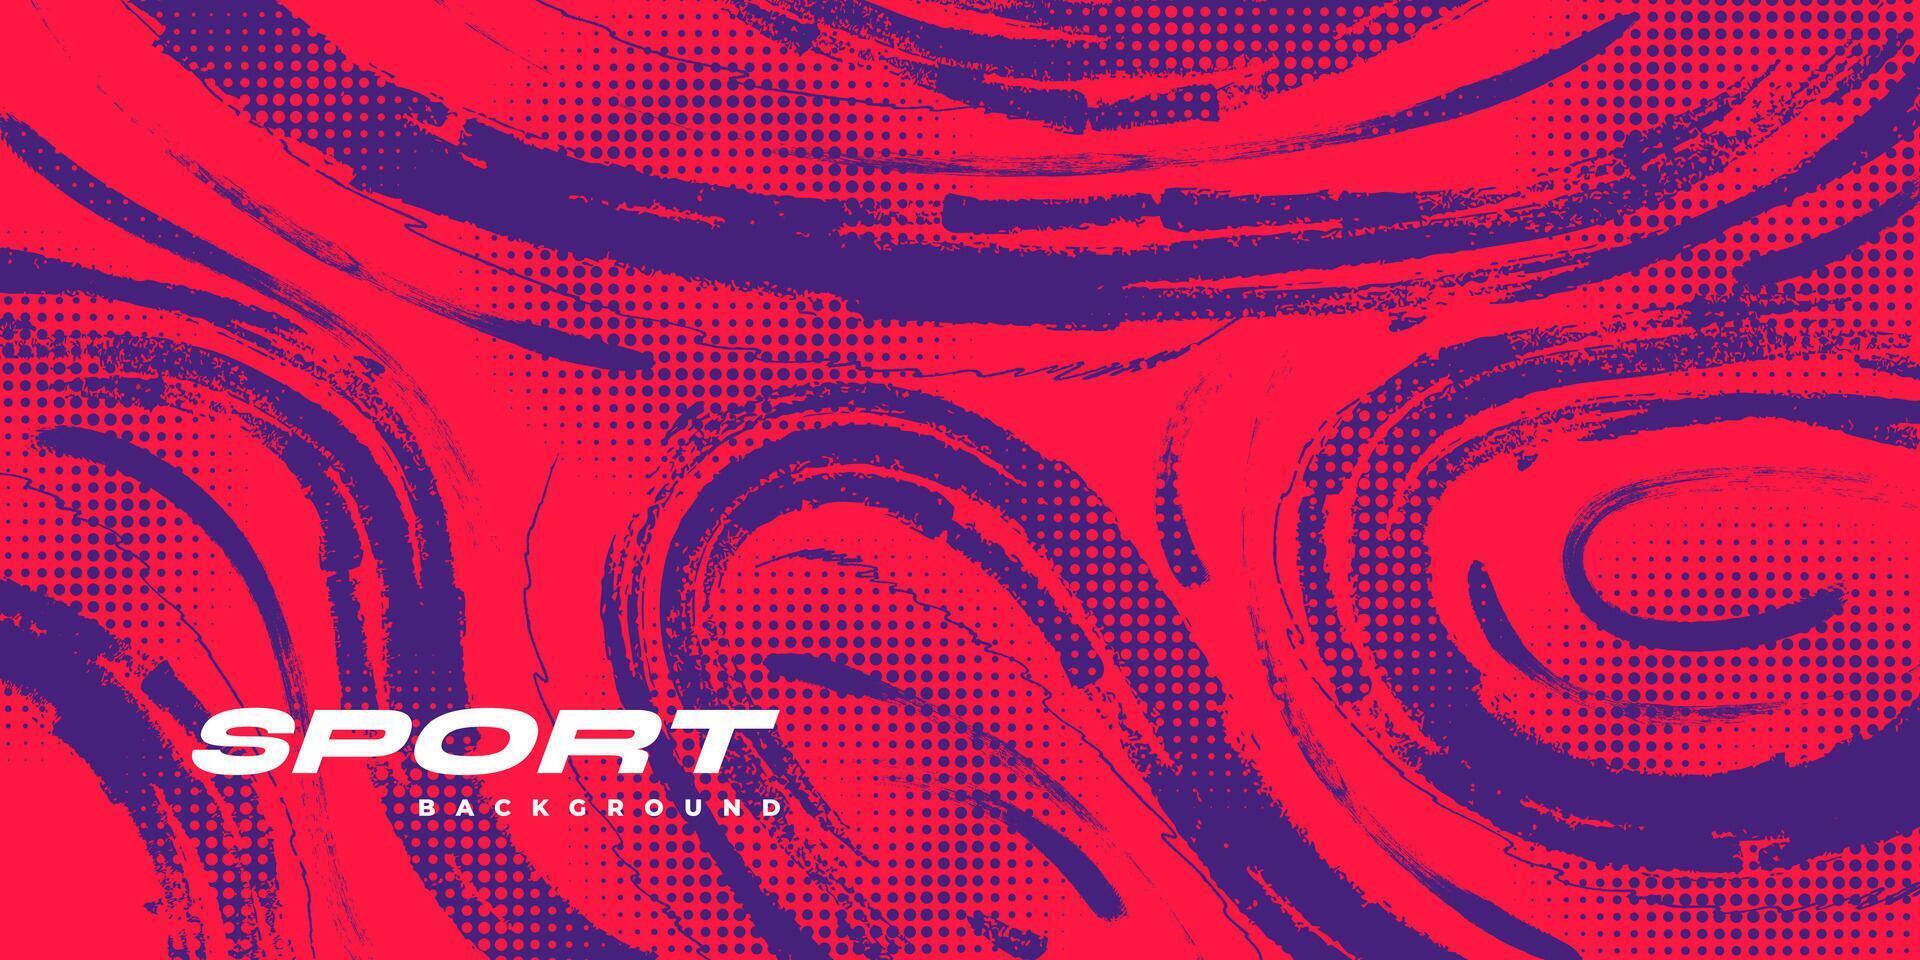 Abstract Sports Background with Red and Purple Brush Texture and Halftone Effect. Retro Grunge Background for Banner or Poster Design vector